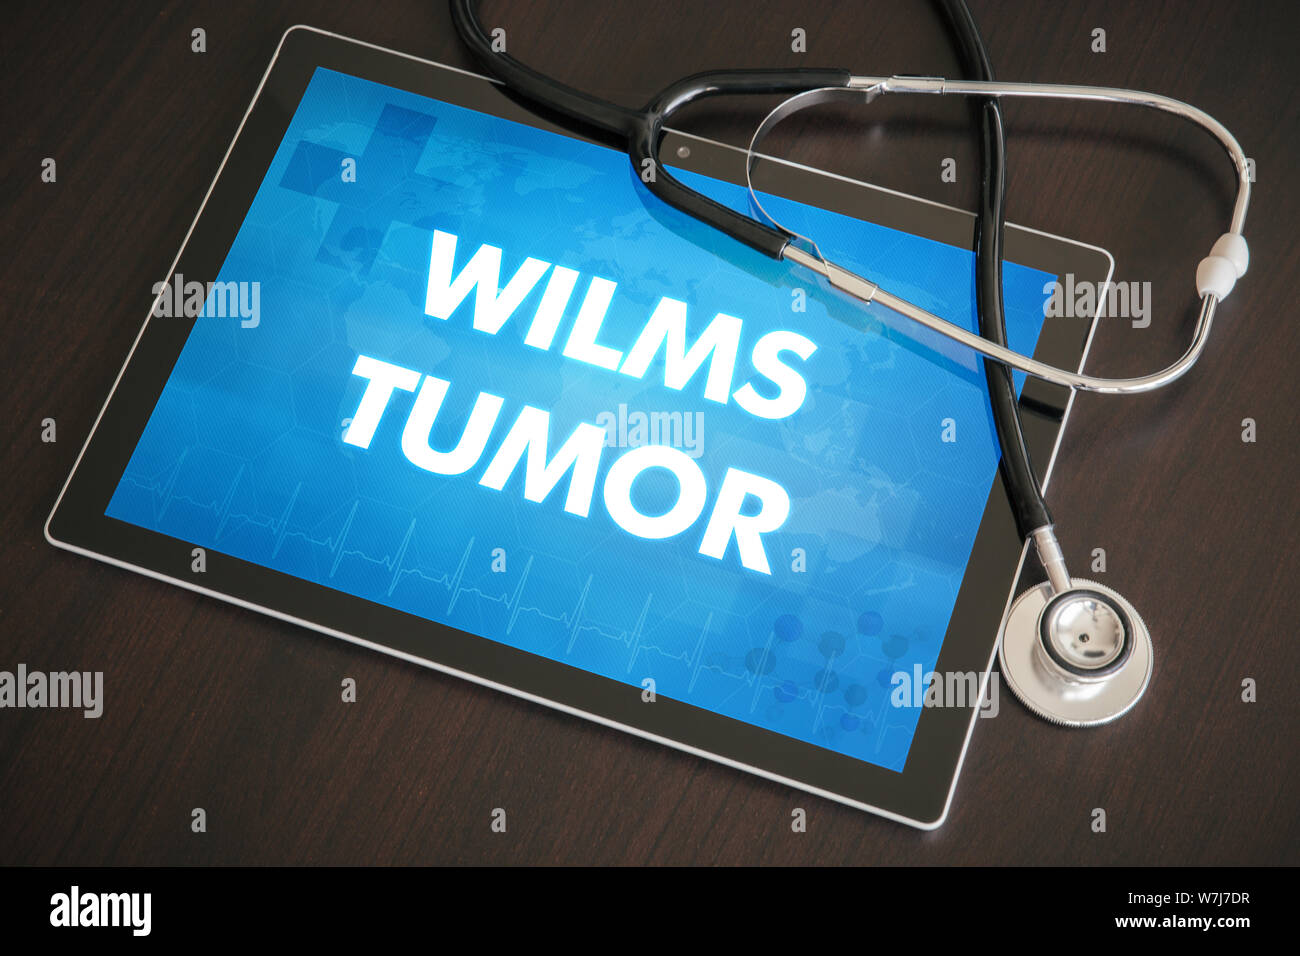 Wilms tumor (cancer type) diagnosis medical concept on tablet screen with stethoscope. Stock Photo